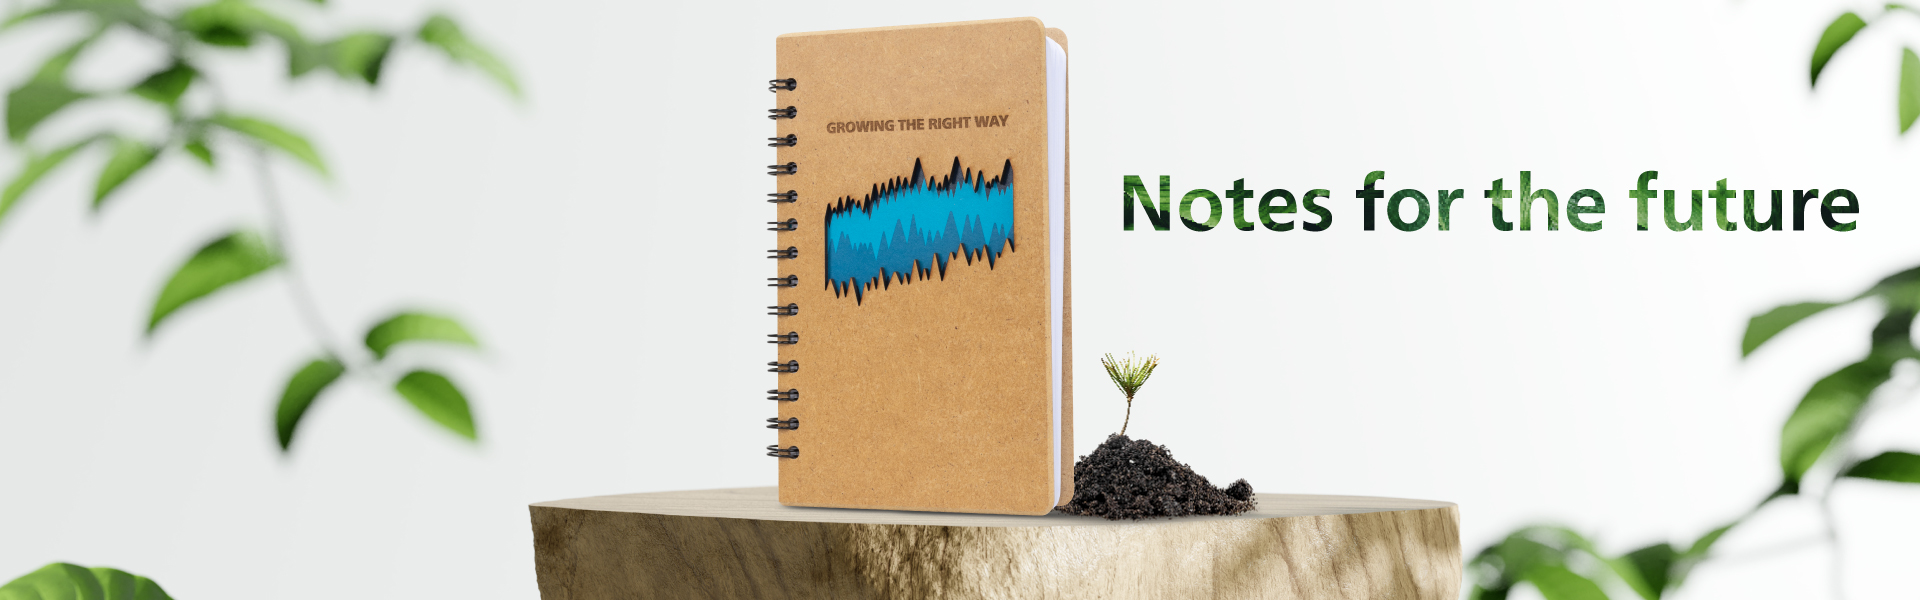 https://atlascopco.profilestore.com/en/product/collections-growing-the-right-way3/notebook-a5-gtrw--PS004803